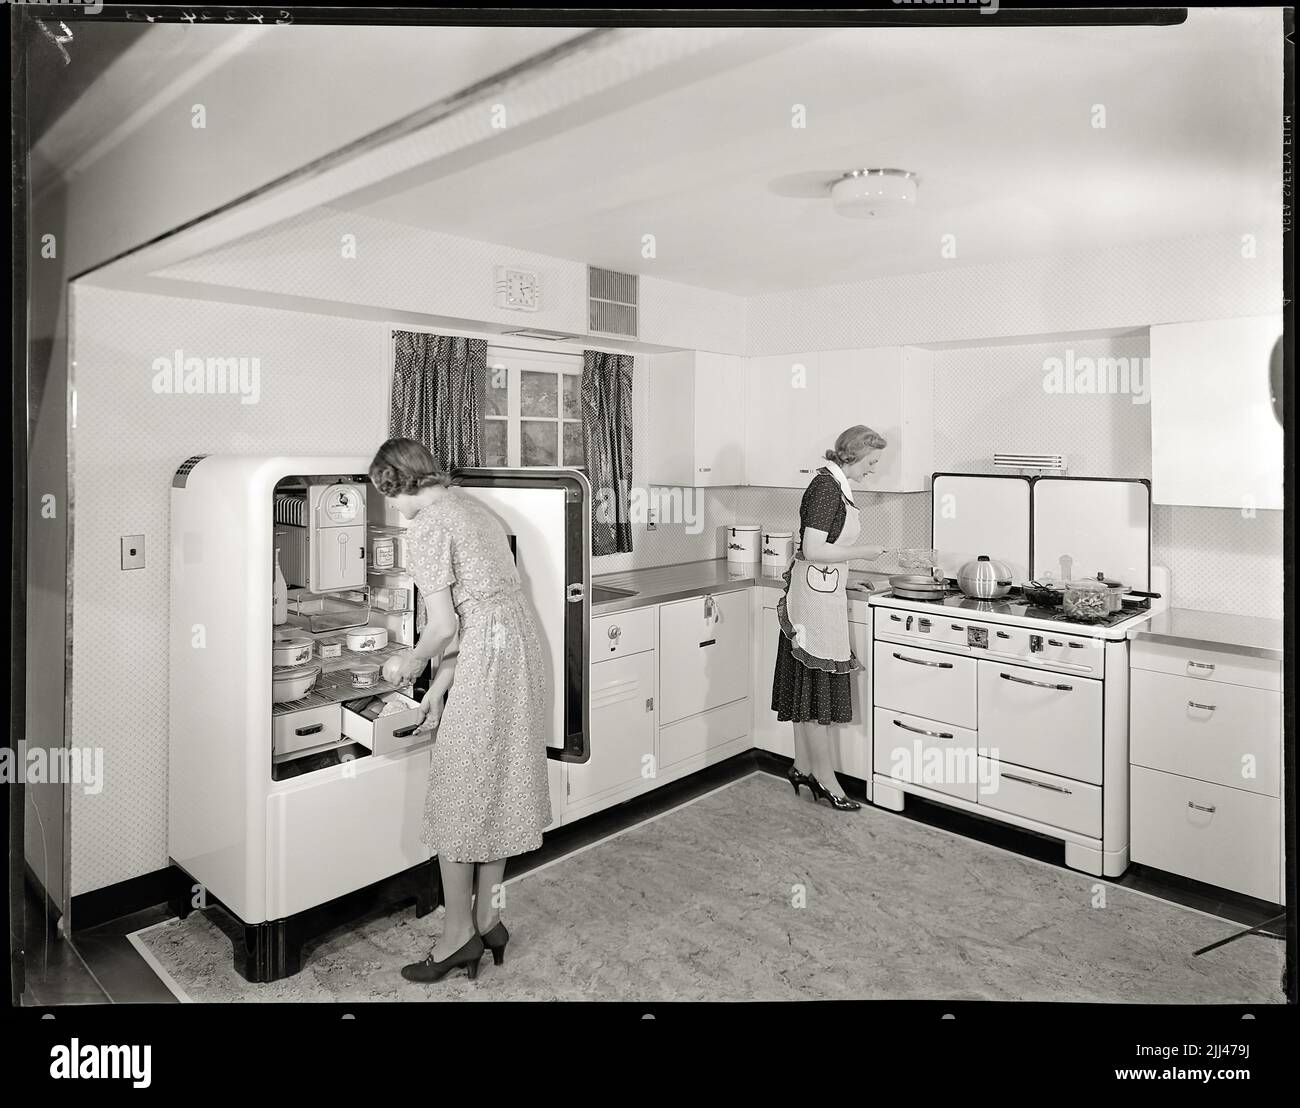 Housewives using modern kitchen appliances for advertisement in the 1940s. Image from 8x10 inch negative. Stock Photo